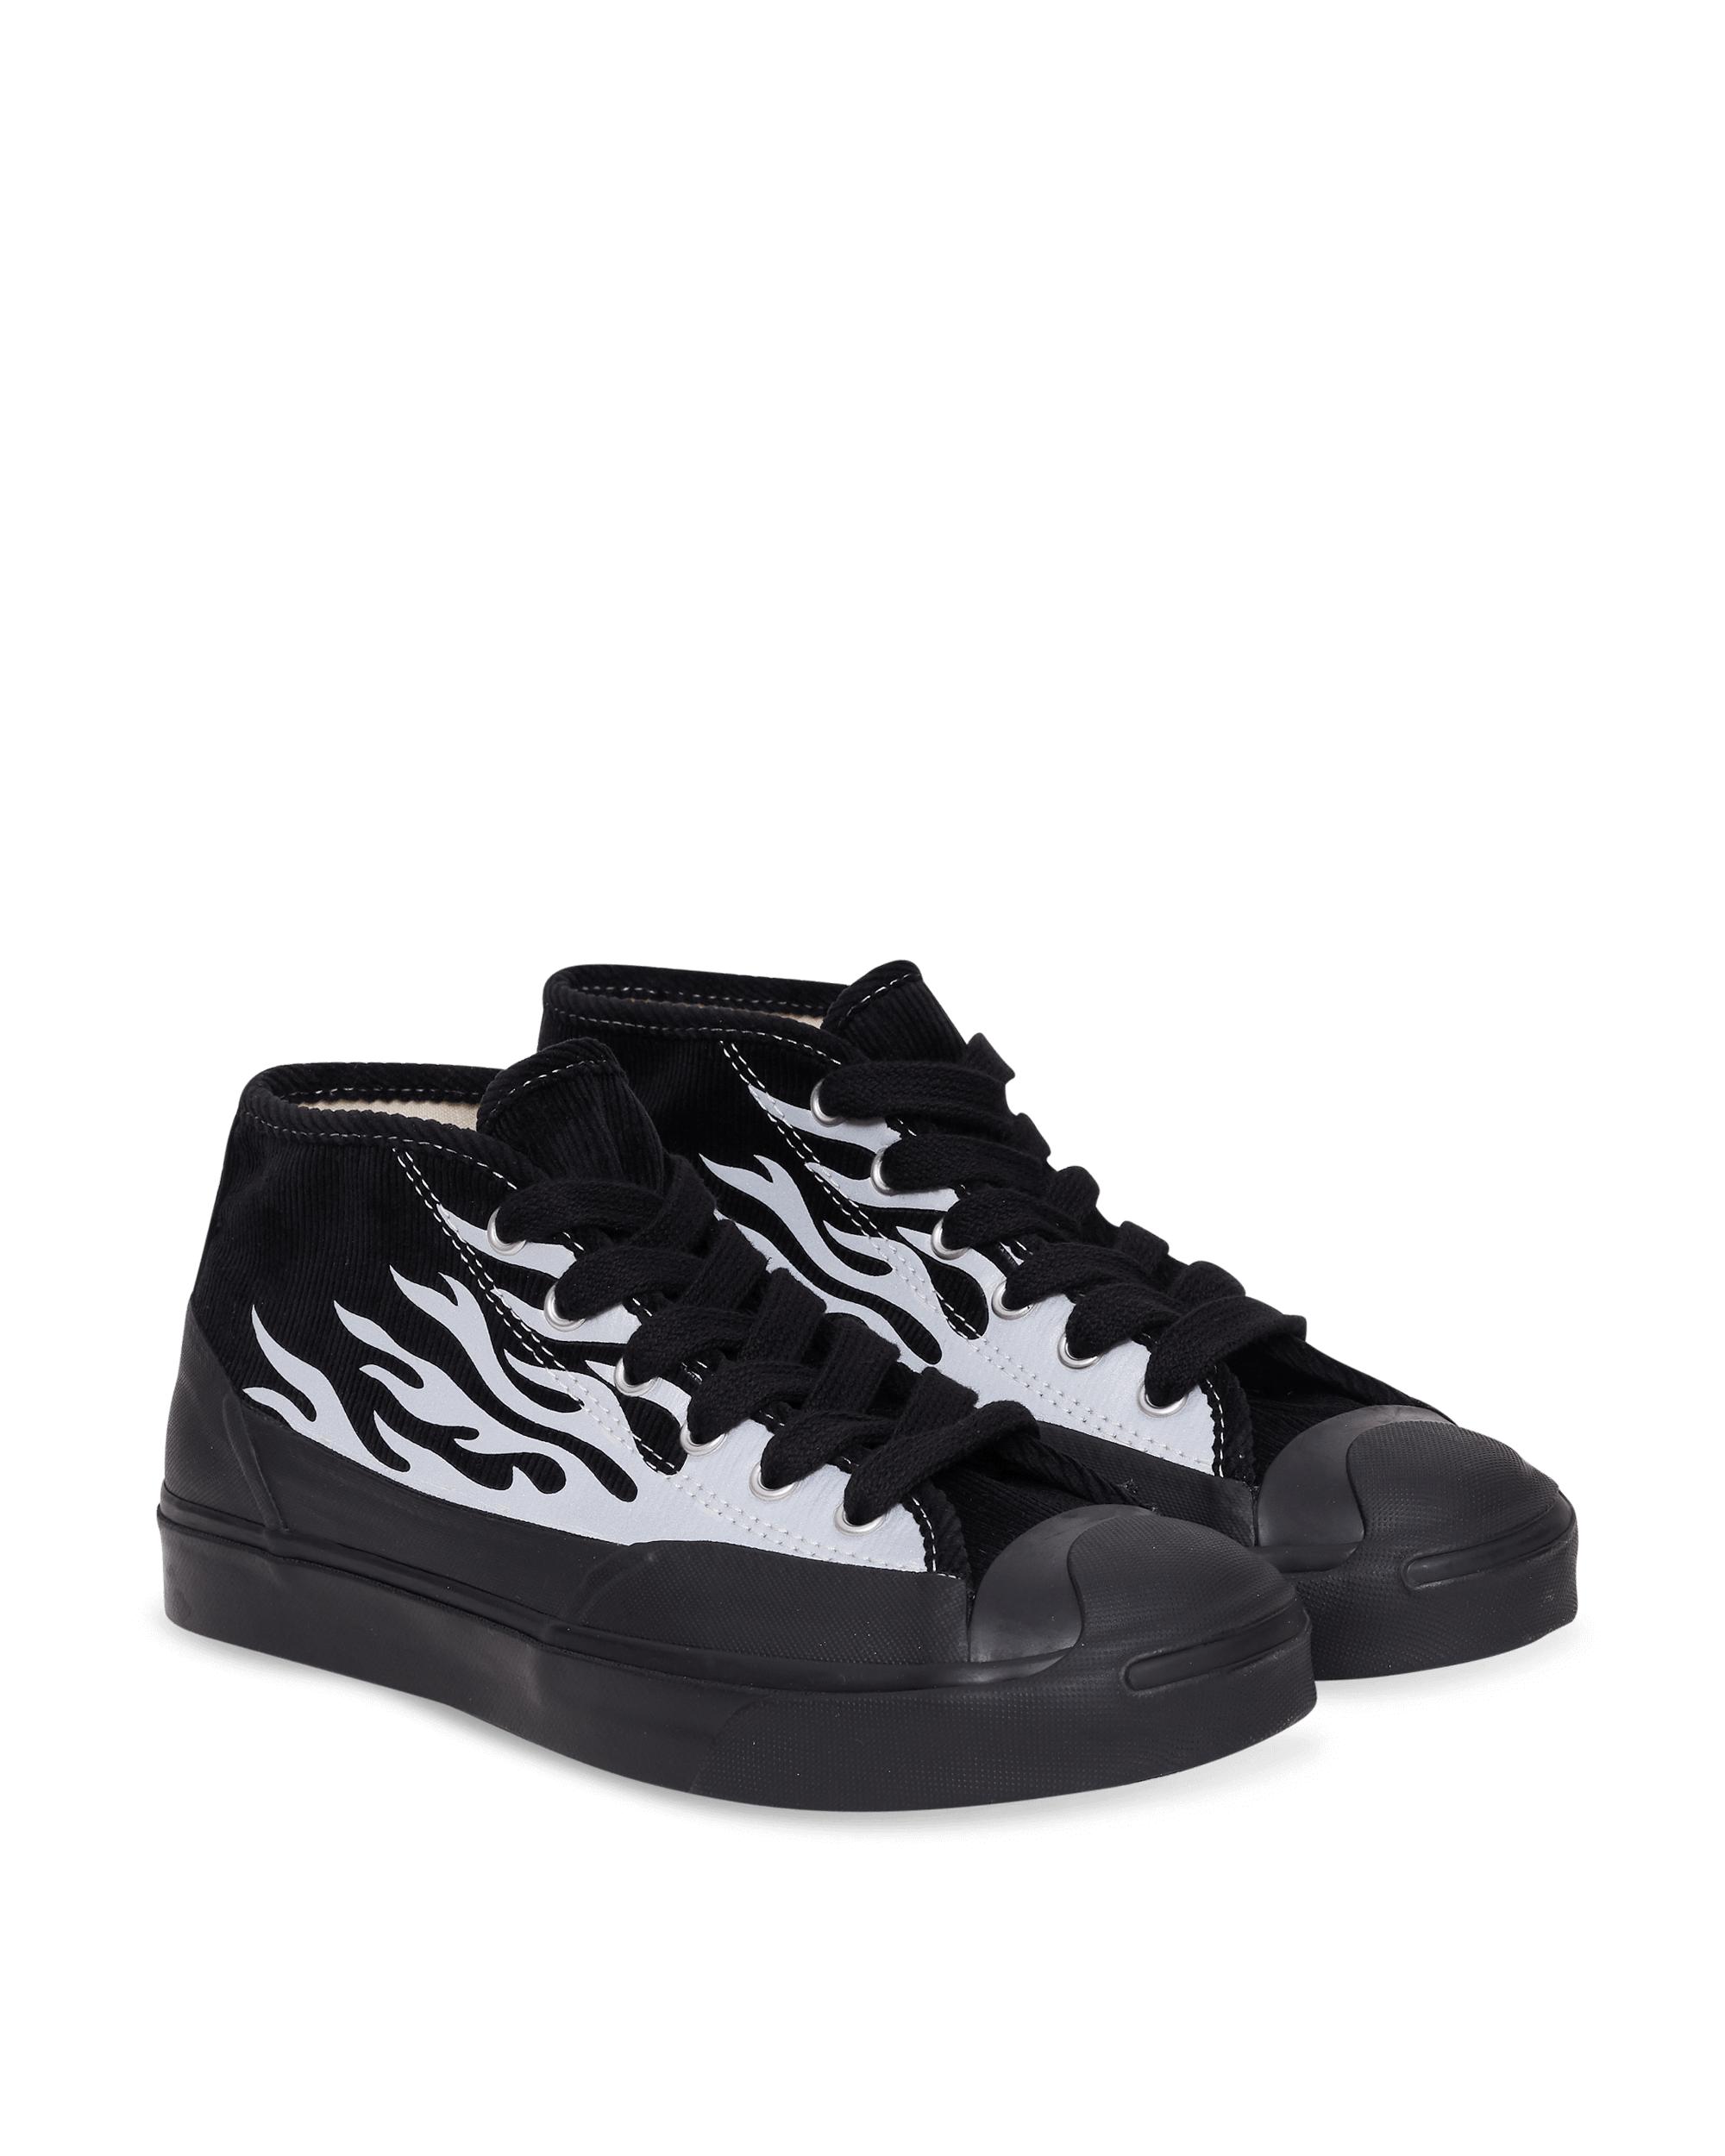 Converse X A$ap Nast Jack Purcell Chukka Mid-top Sneakers in Black & Silver  (Black) for Men | Lyst